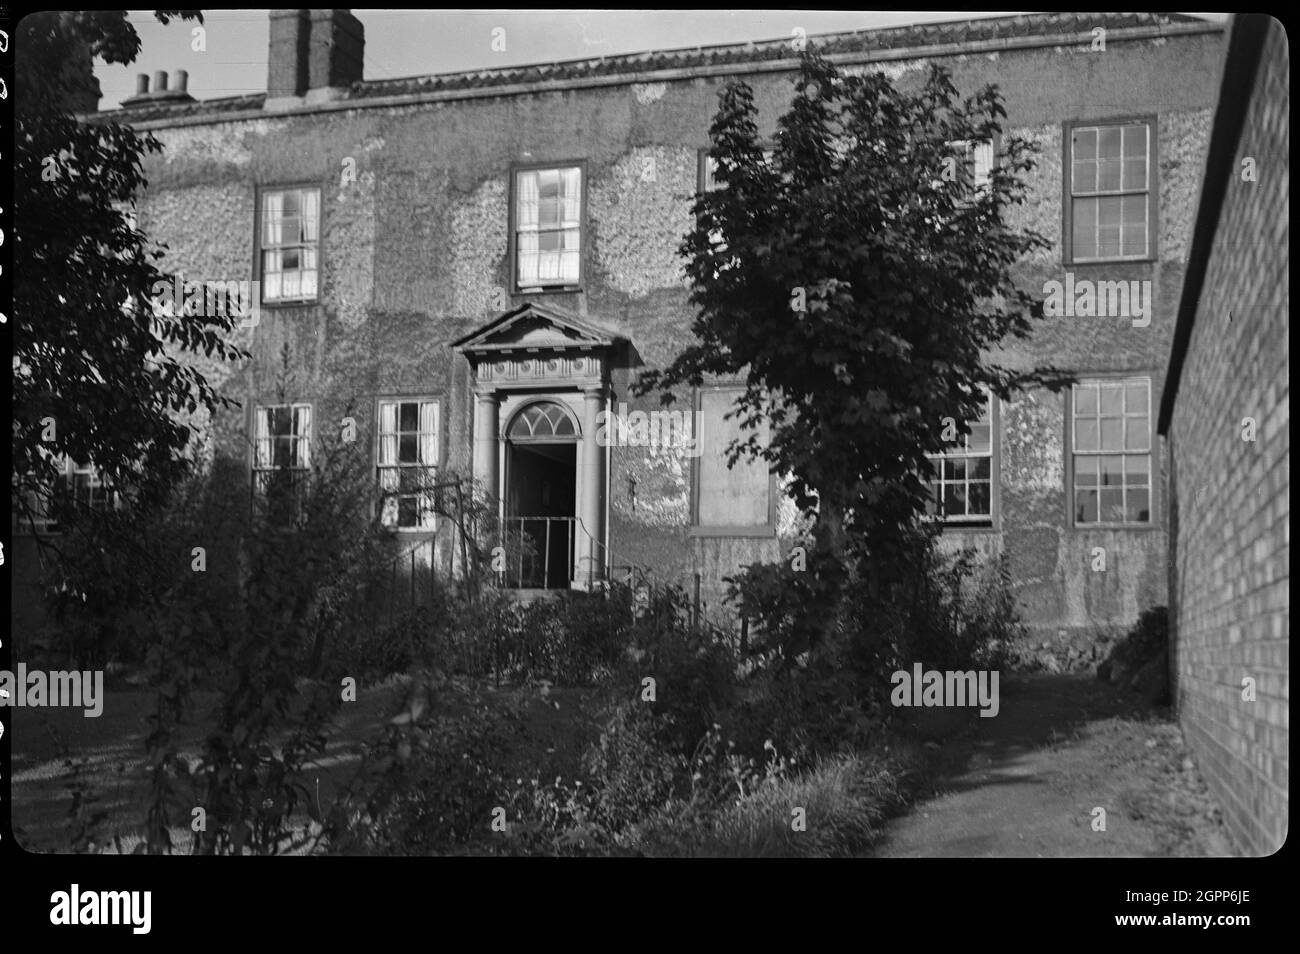 Clarence Hotel, Lead Yard, Darlington, 1942. An exterior view of the Clarence Hotel, which may have been situated on Lead Yard and demolished circa 1975. The image possibly shows the garden front, which had two storeys and a central door under a pediment. The hotel appears derelict. Lead Yard was situated south of St Cuthbert's Church and joined Feethams in the west. Stock Photo